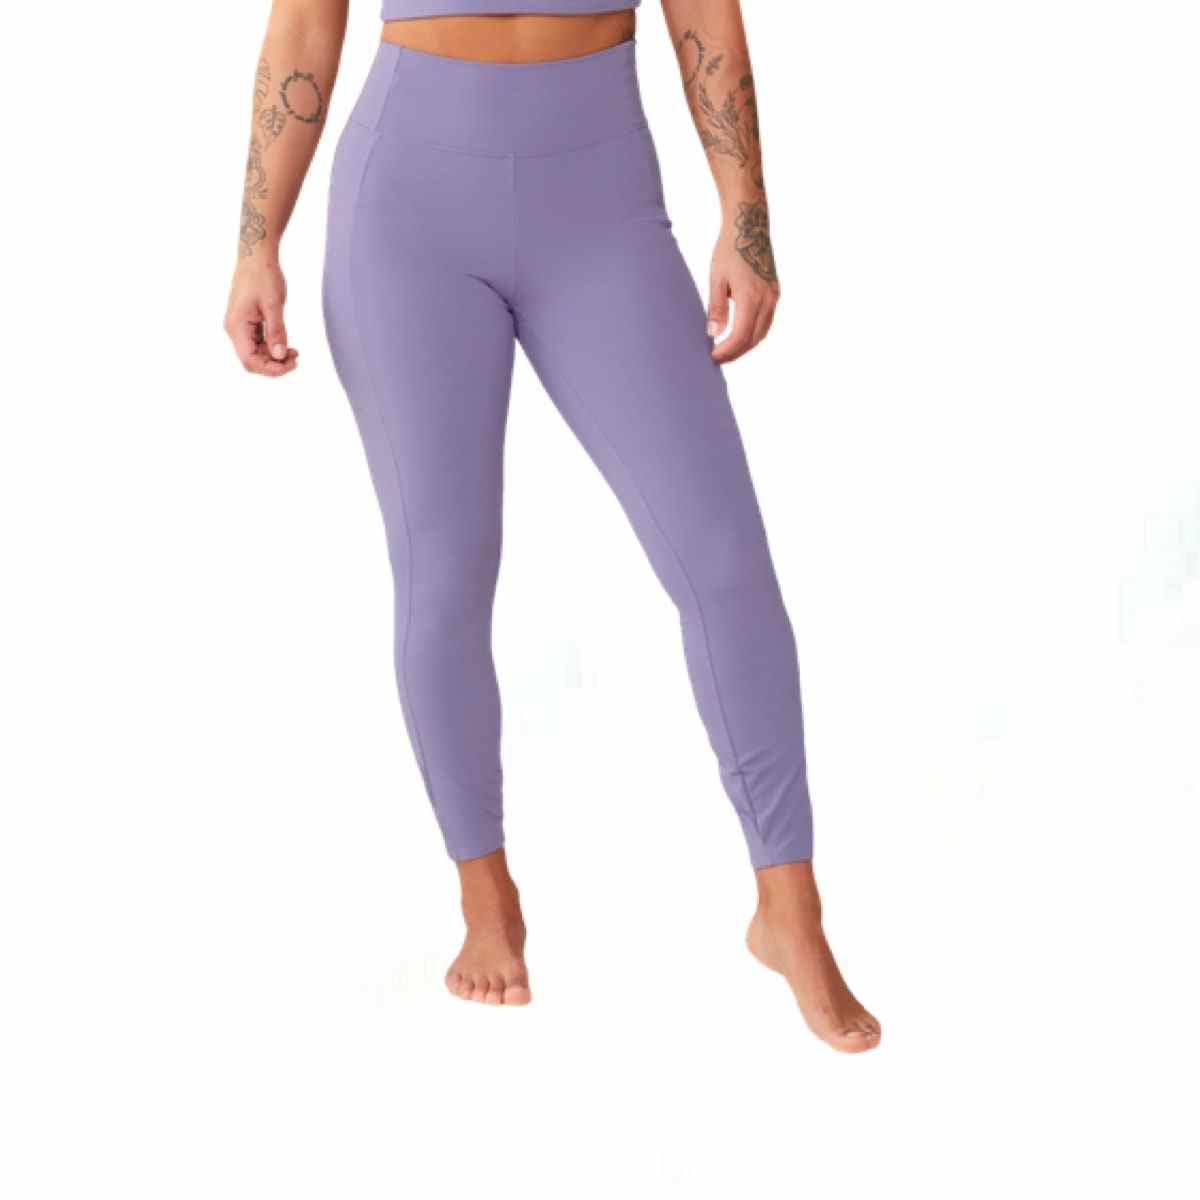 Lila Rei Co-op Take Your Time 7/8 Leggings auf Modell